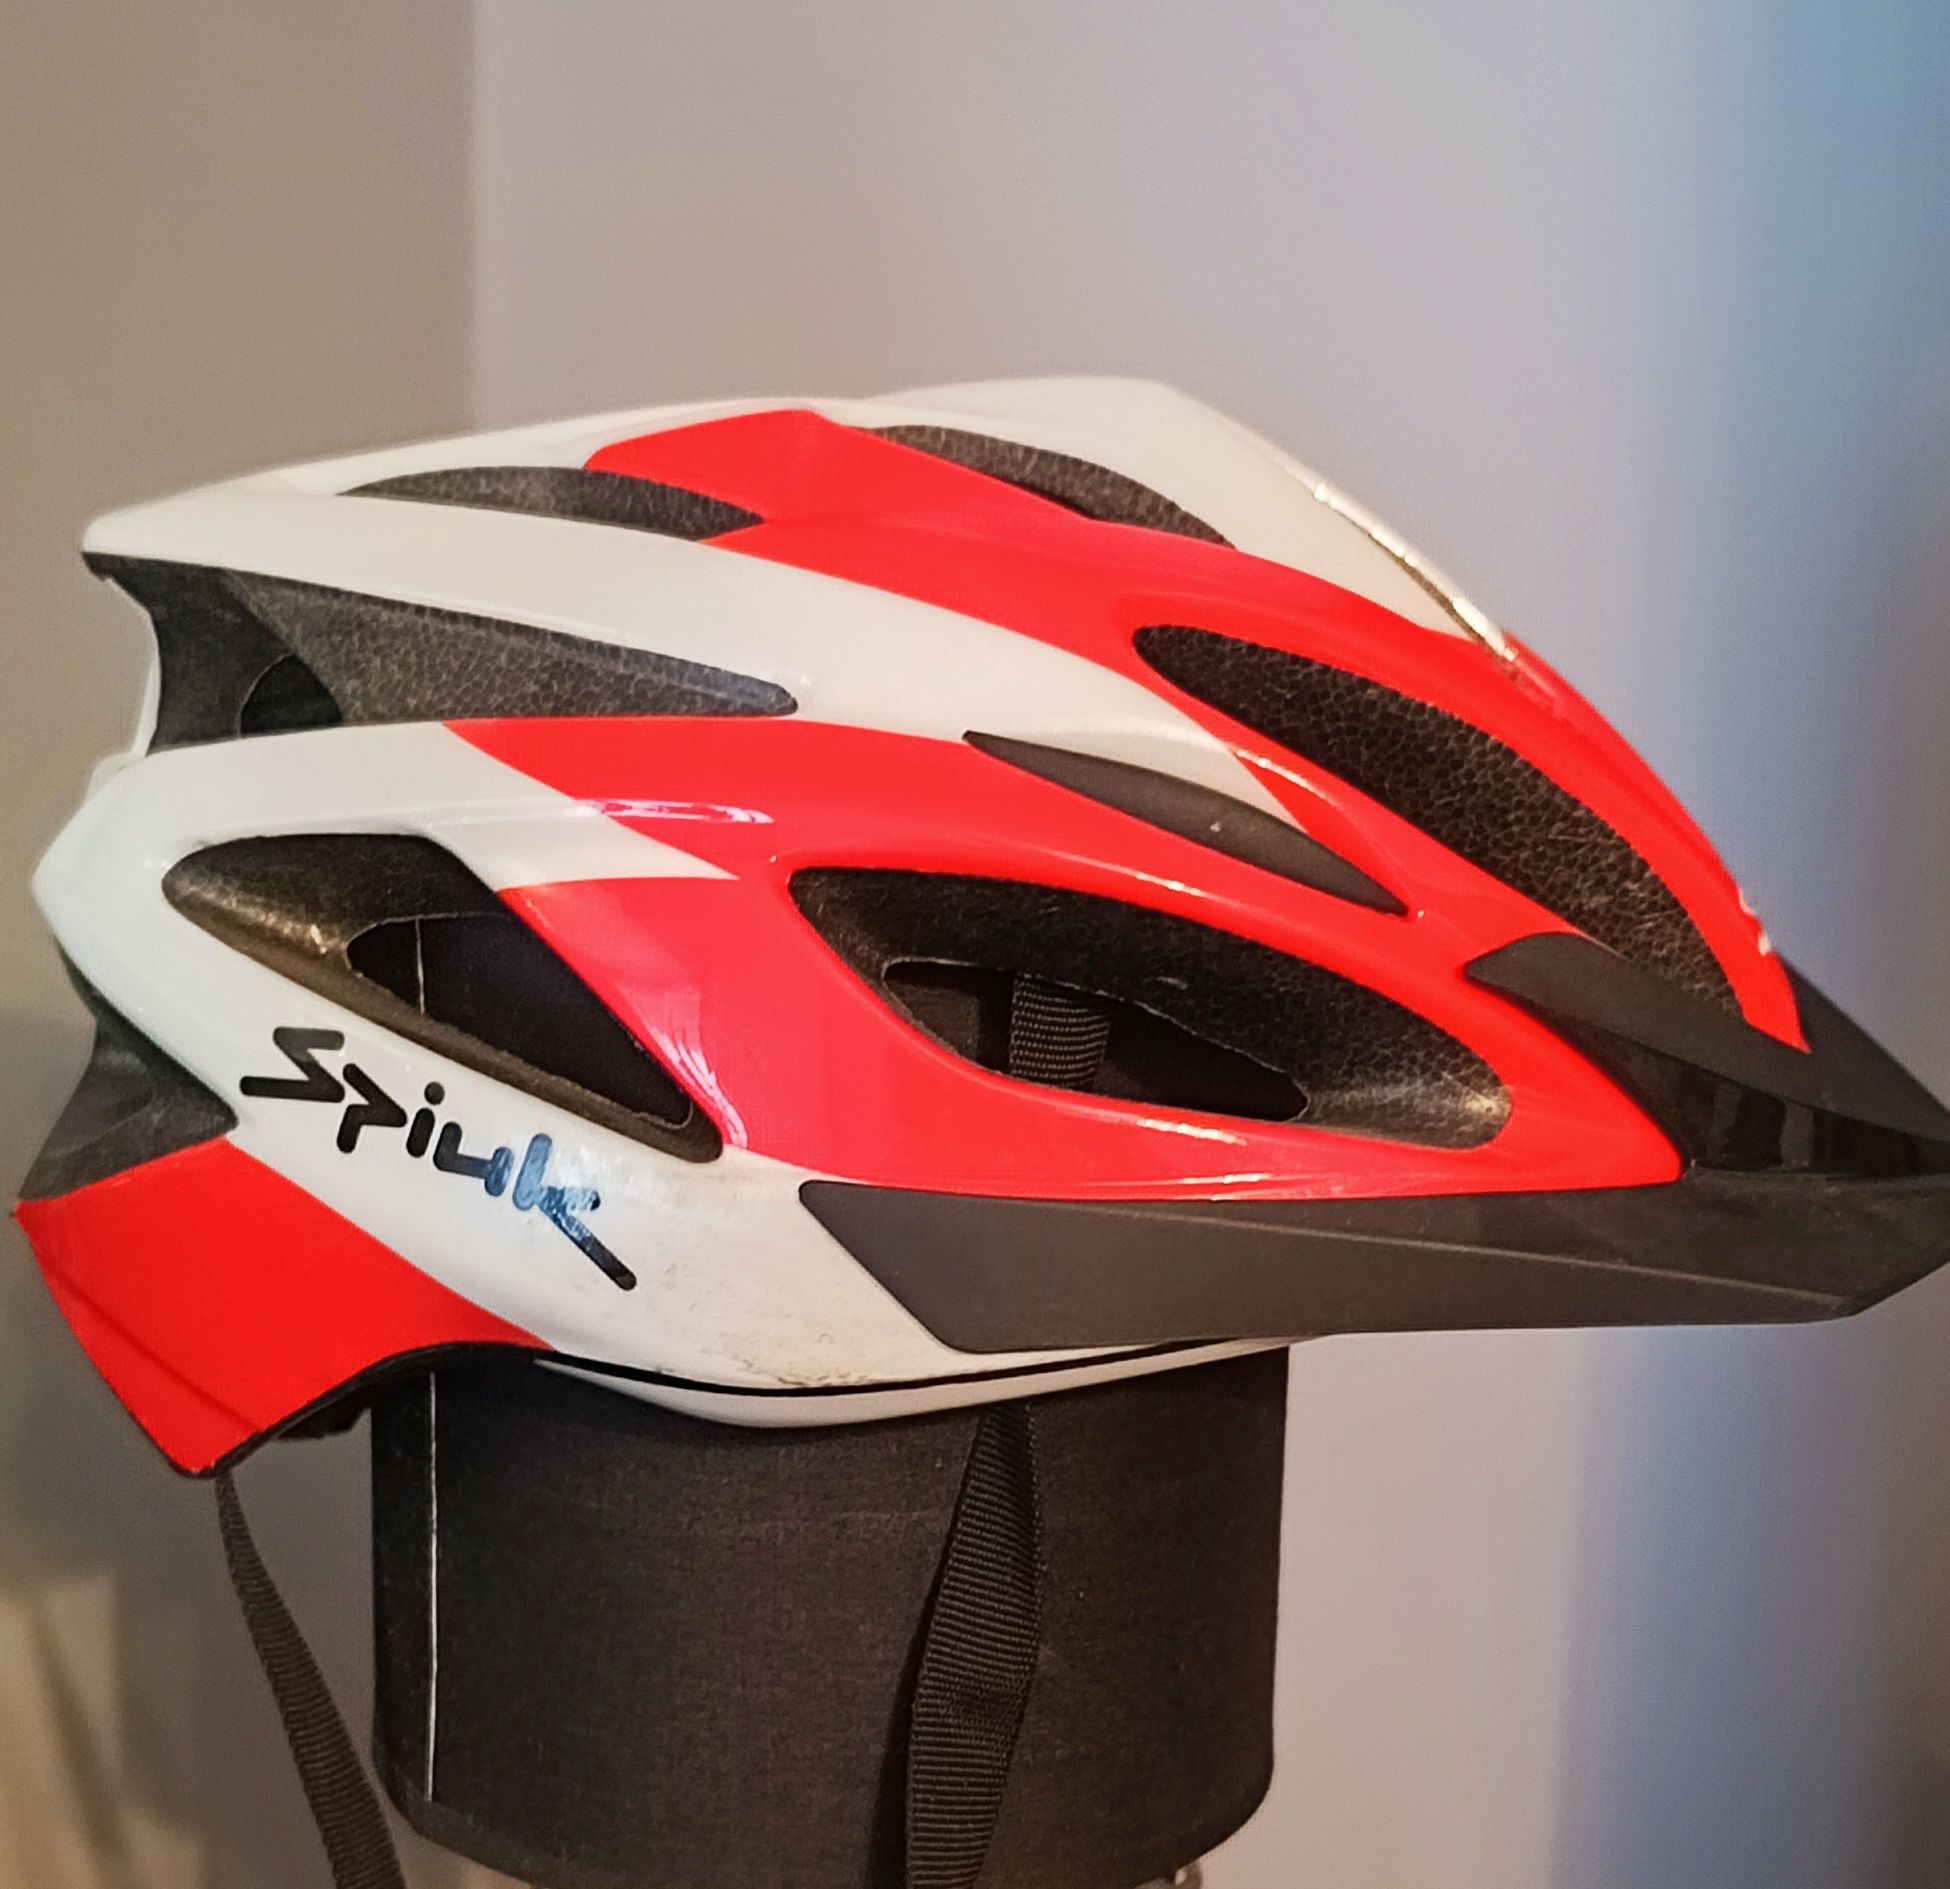 Kask rowerowy Spiuk Tamera M-L (58-62) nowy